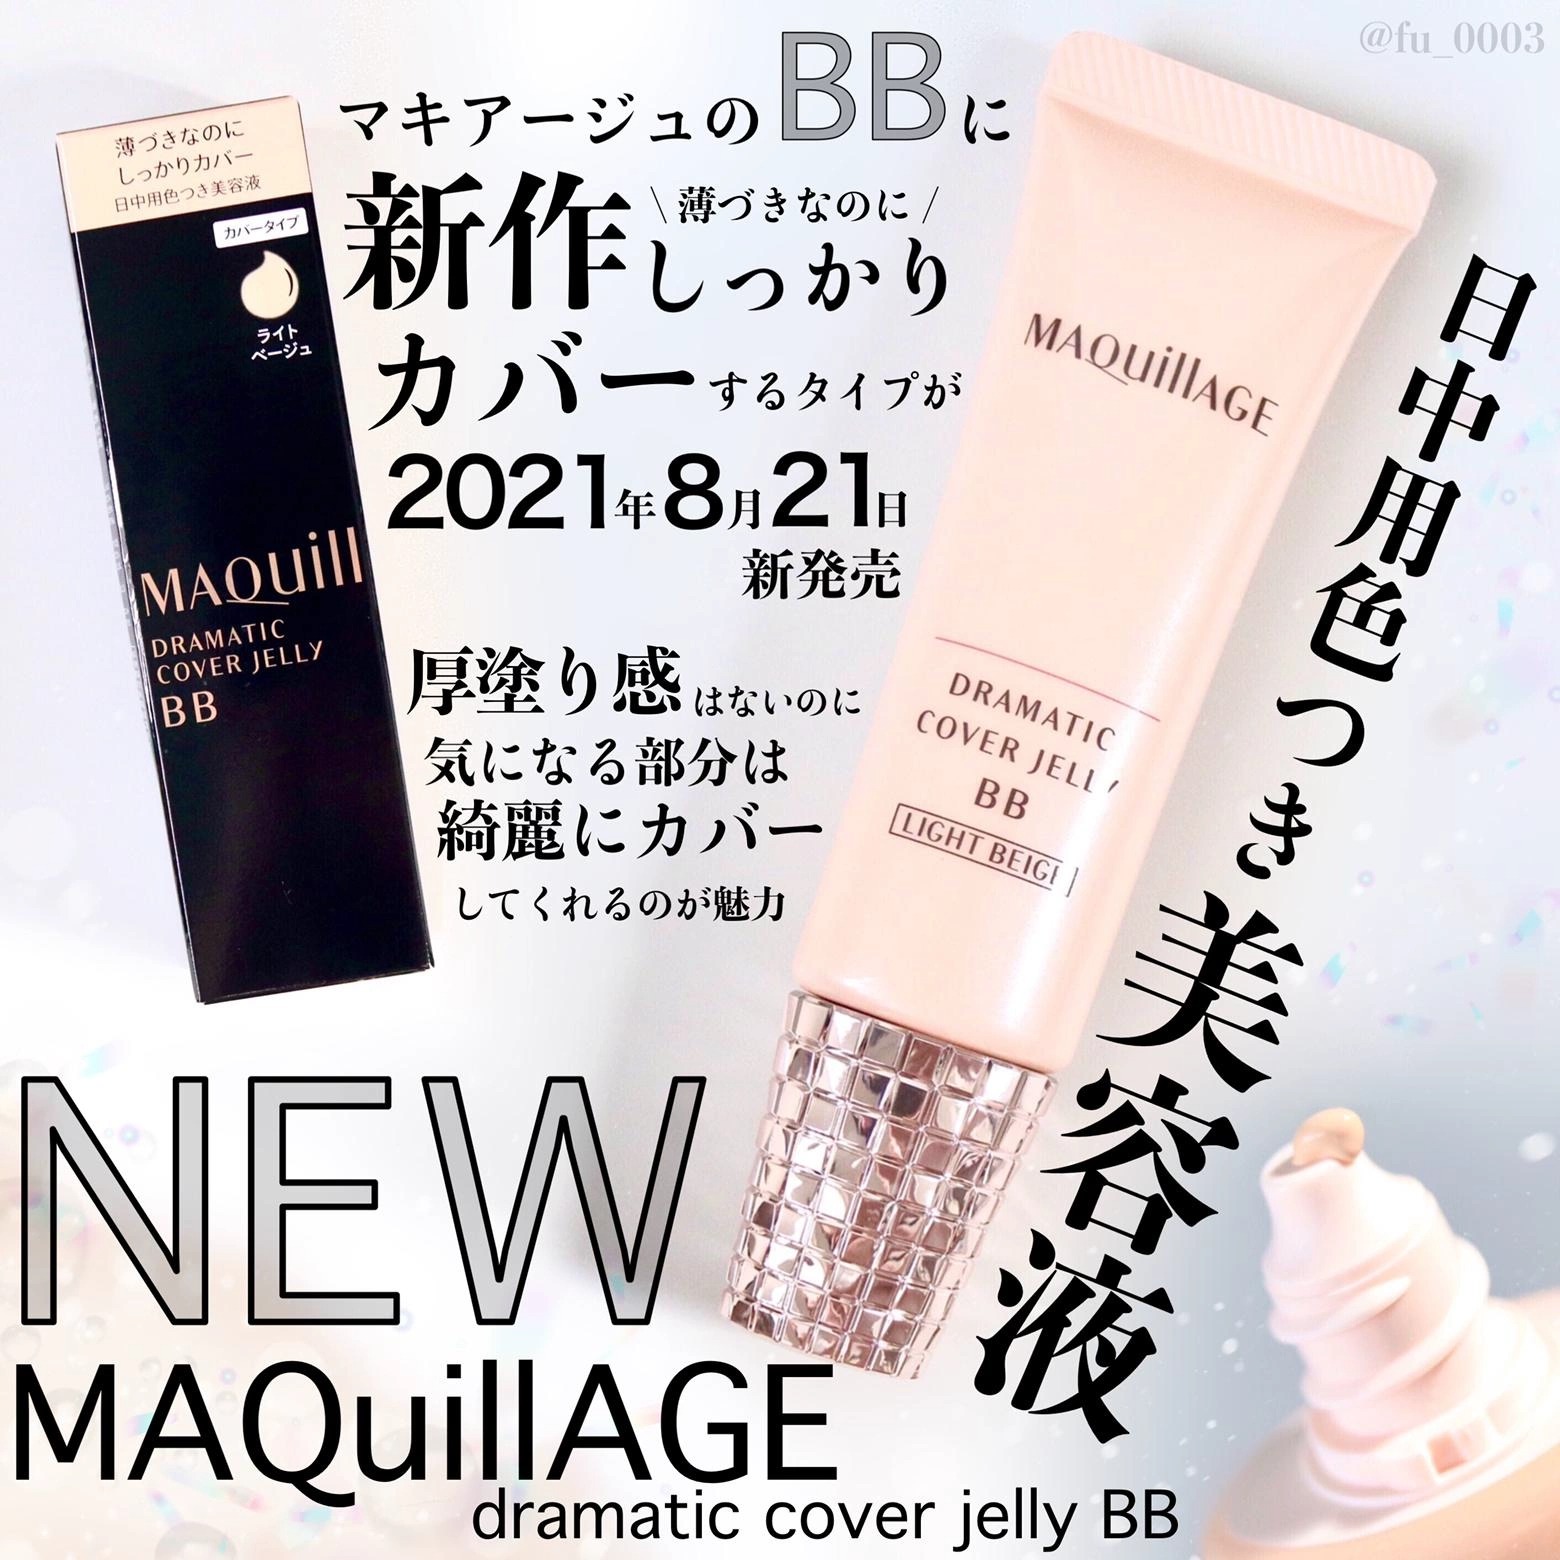 shiseido maquillage bb dramatic cover jelly spf 50